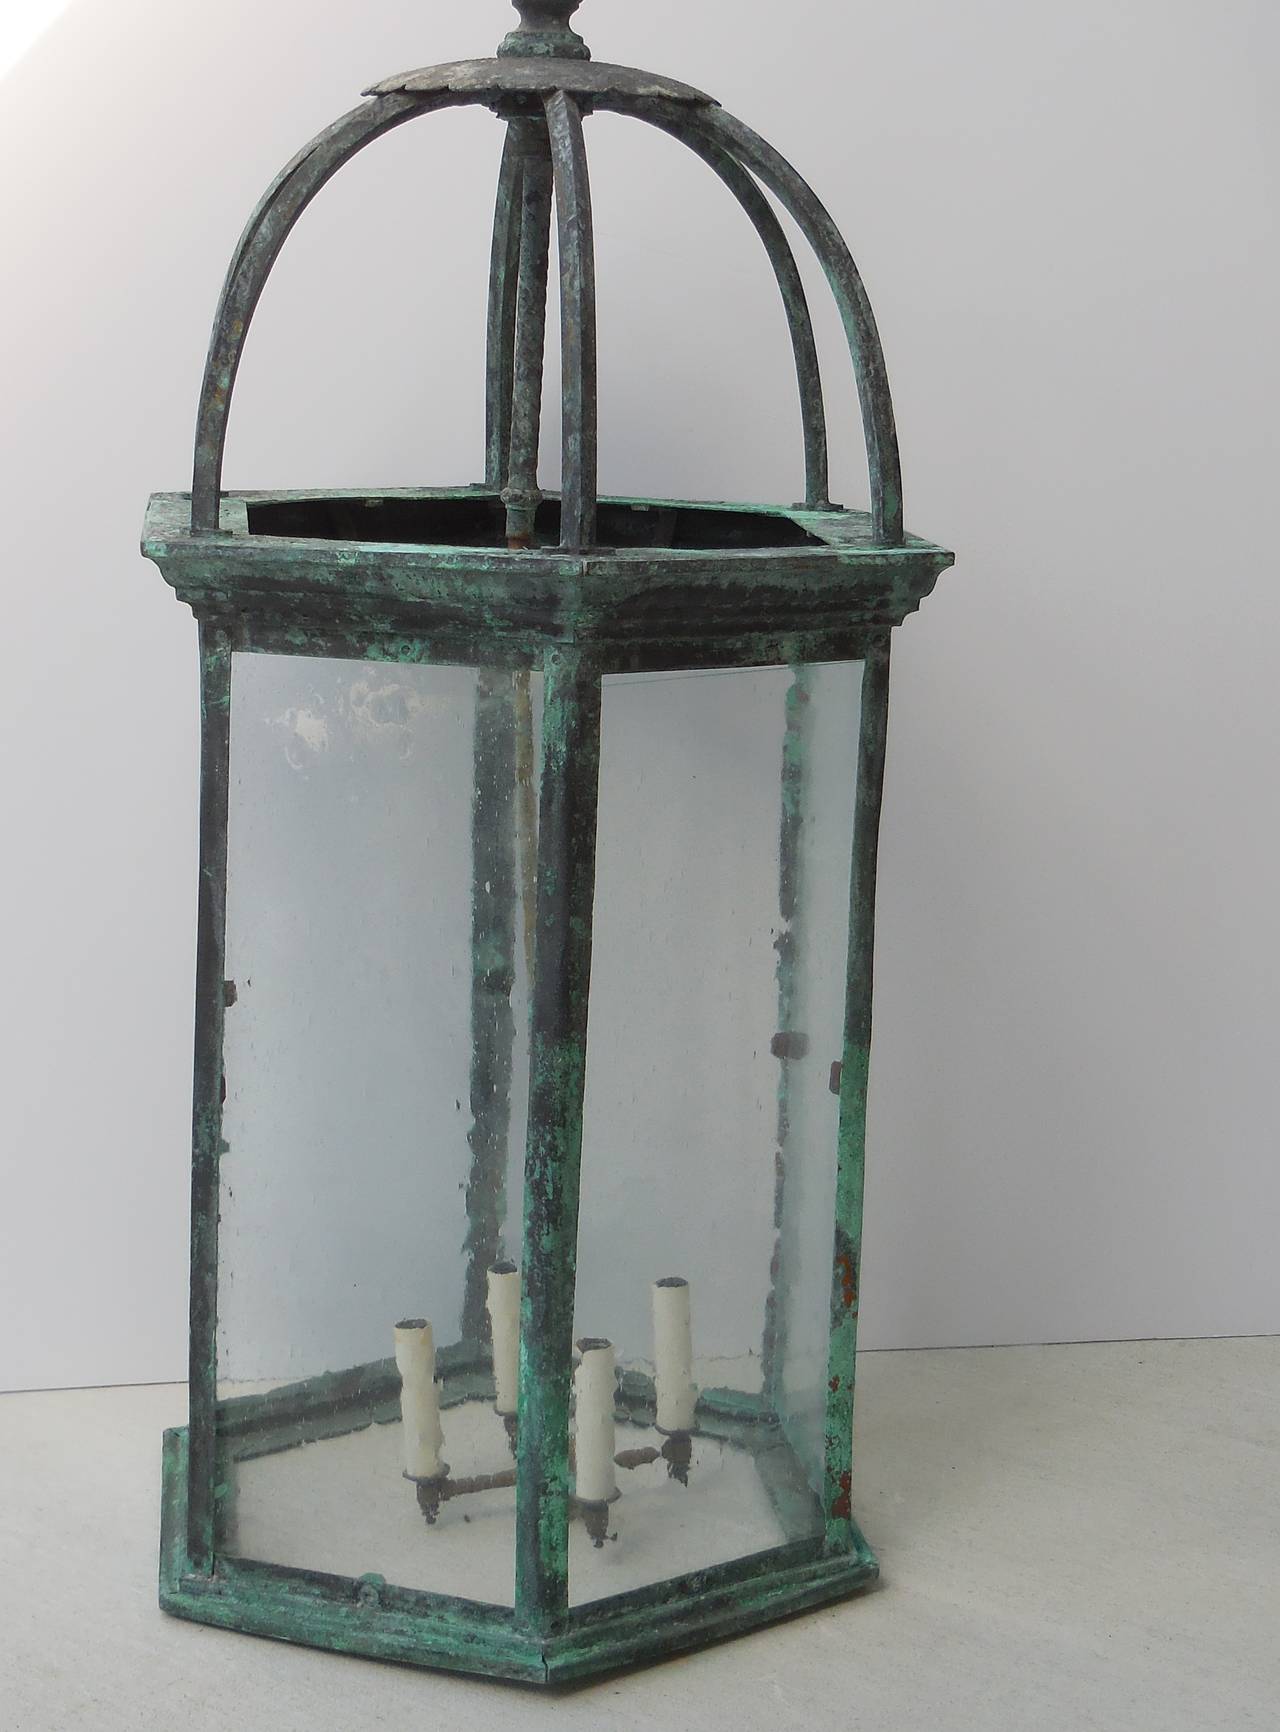 Unusal antique lantern made of copper ,six long sides with seeded glass .
New brass cluster of four /60/ watt light electrified and ready to light .
The antique lantern is a salvage of un old estate in palm beach Florida .